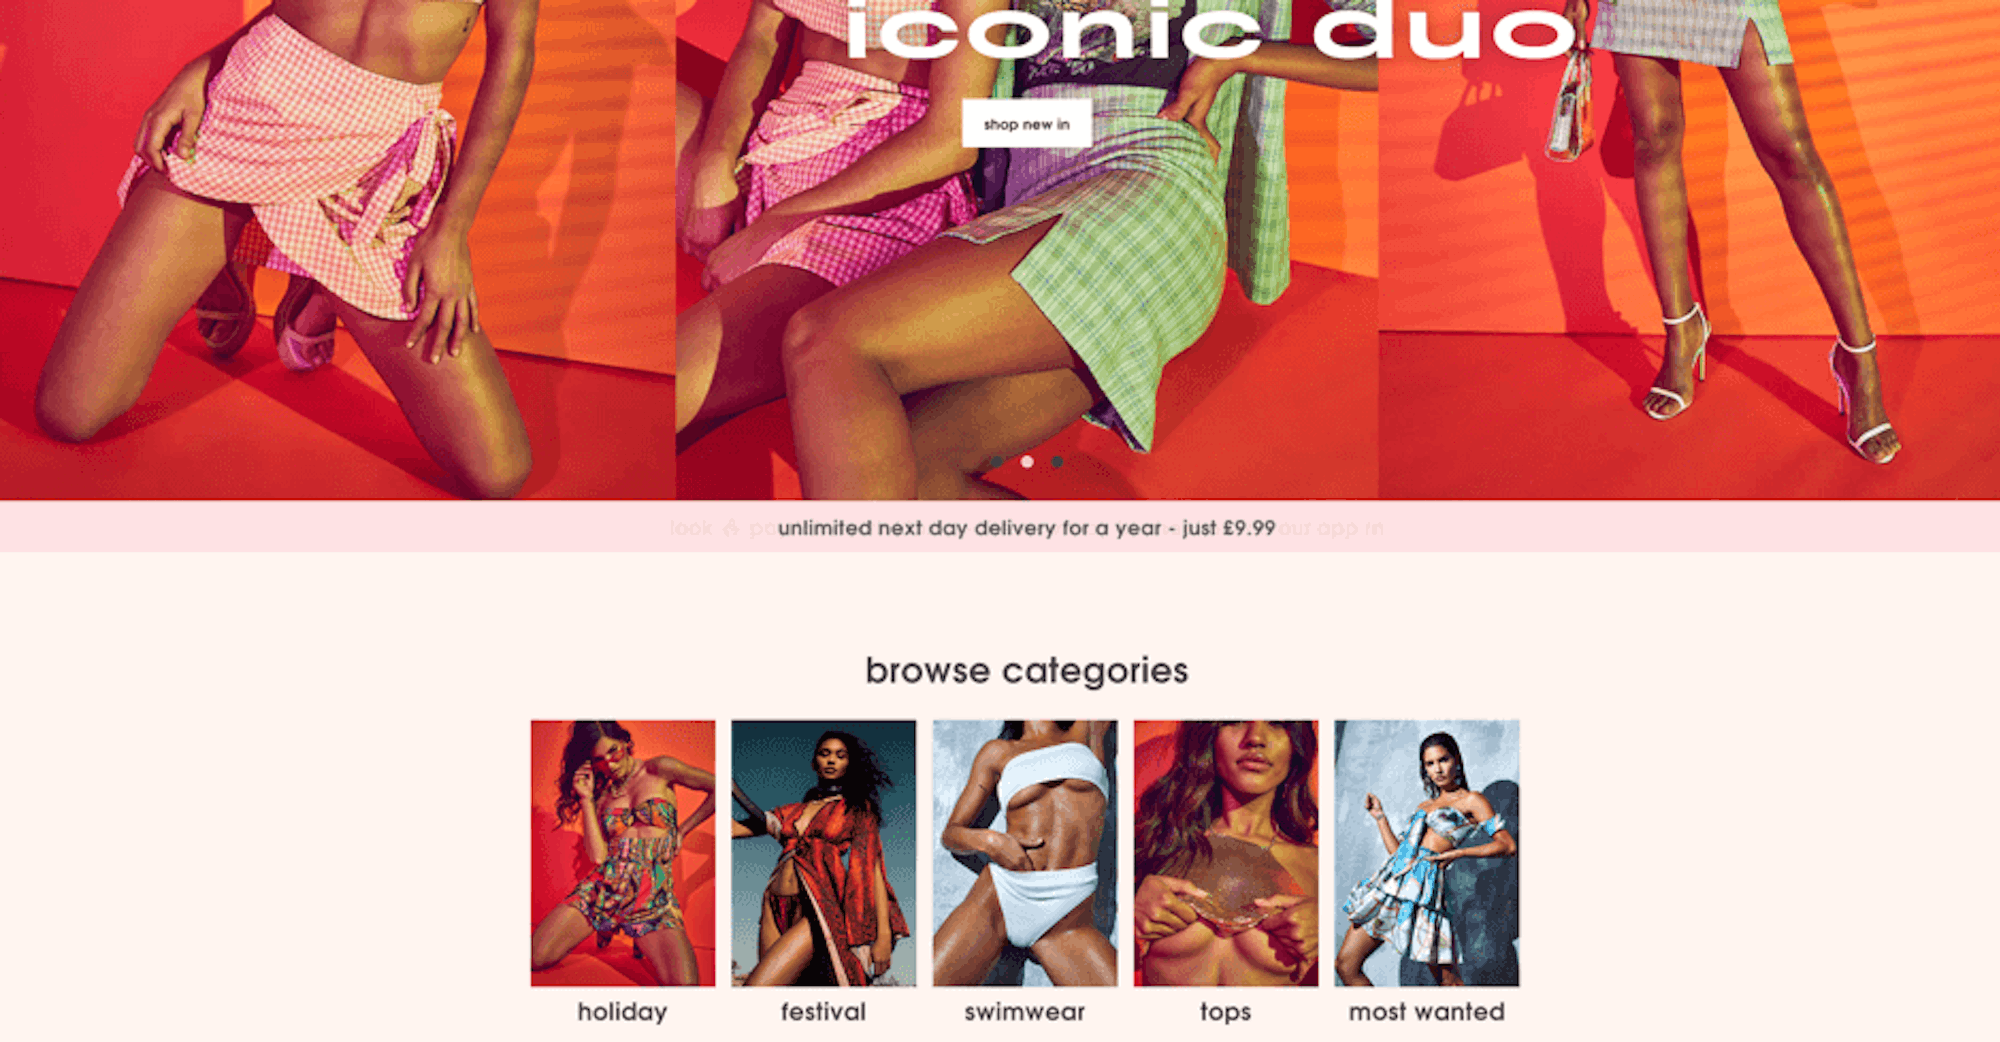 Missguided's home page. prioritises categories nicely and doesn't overwhelm visitors.